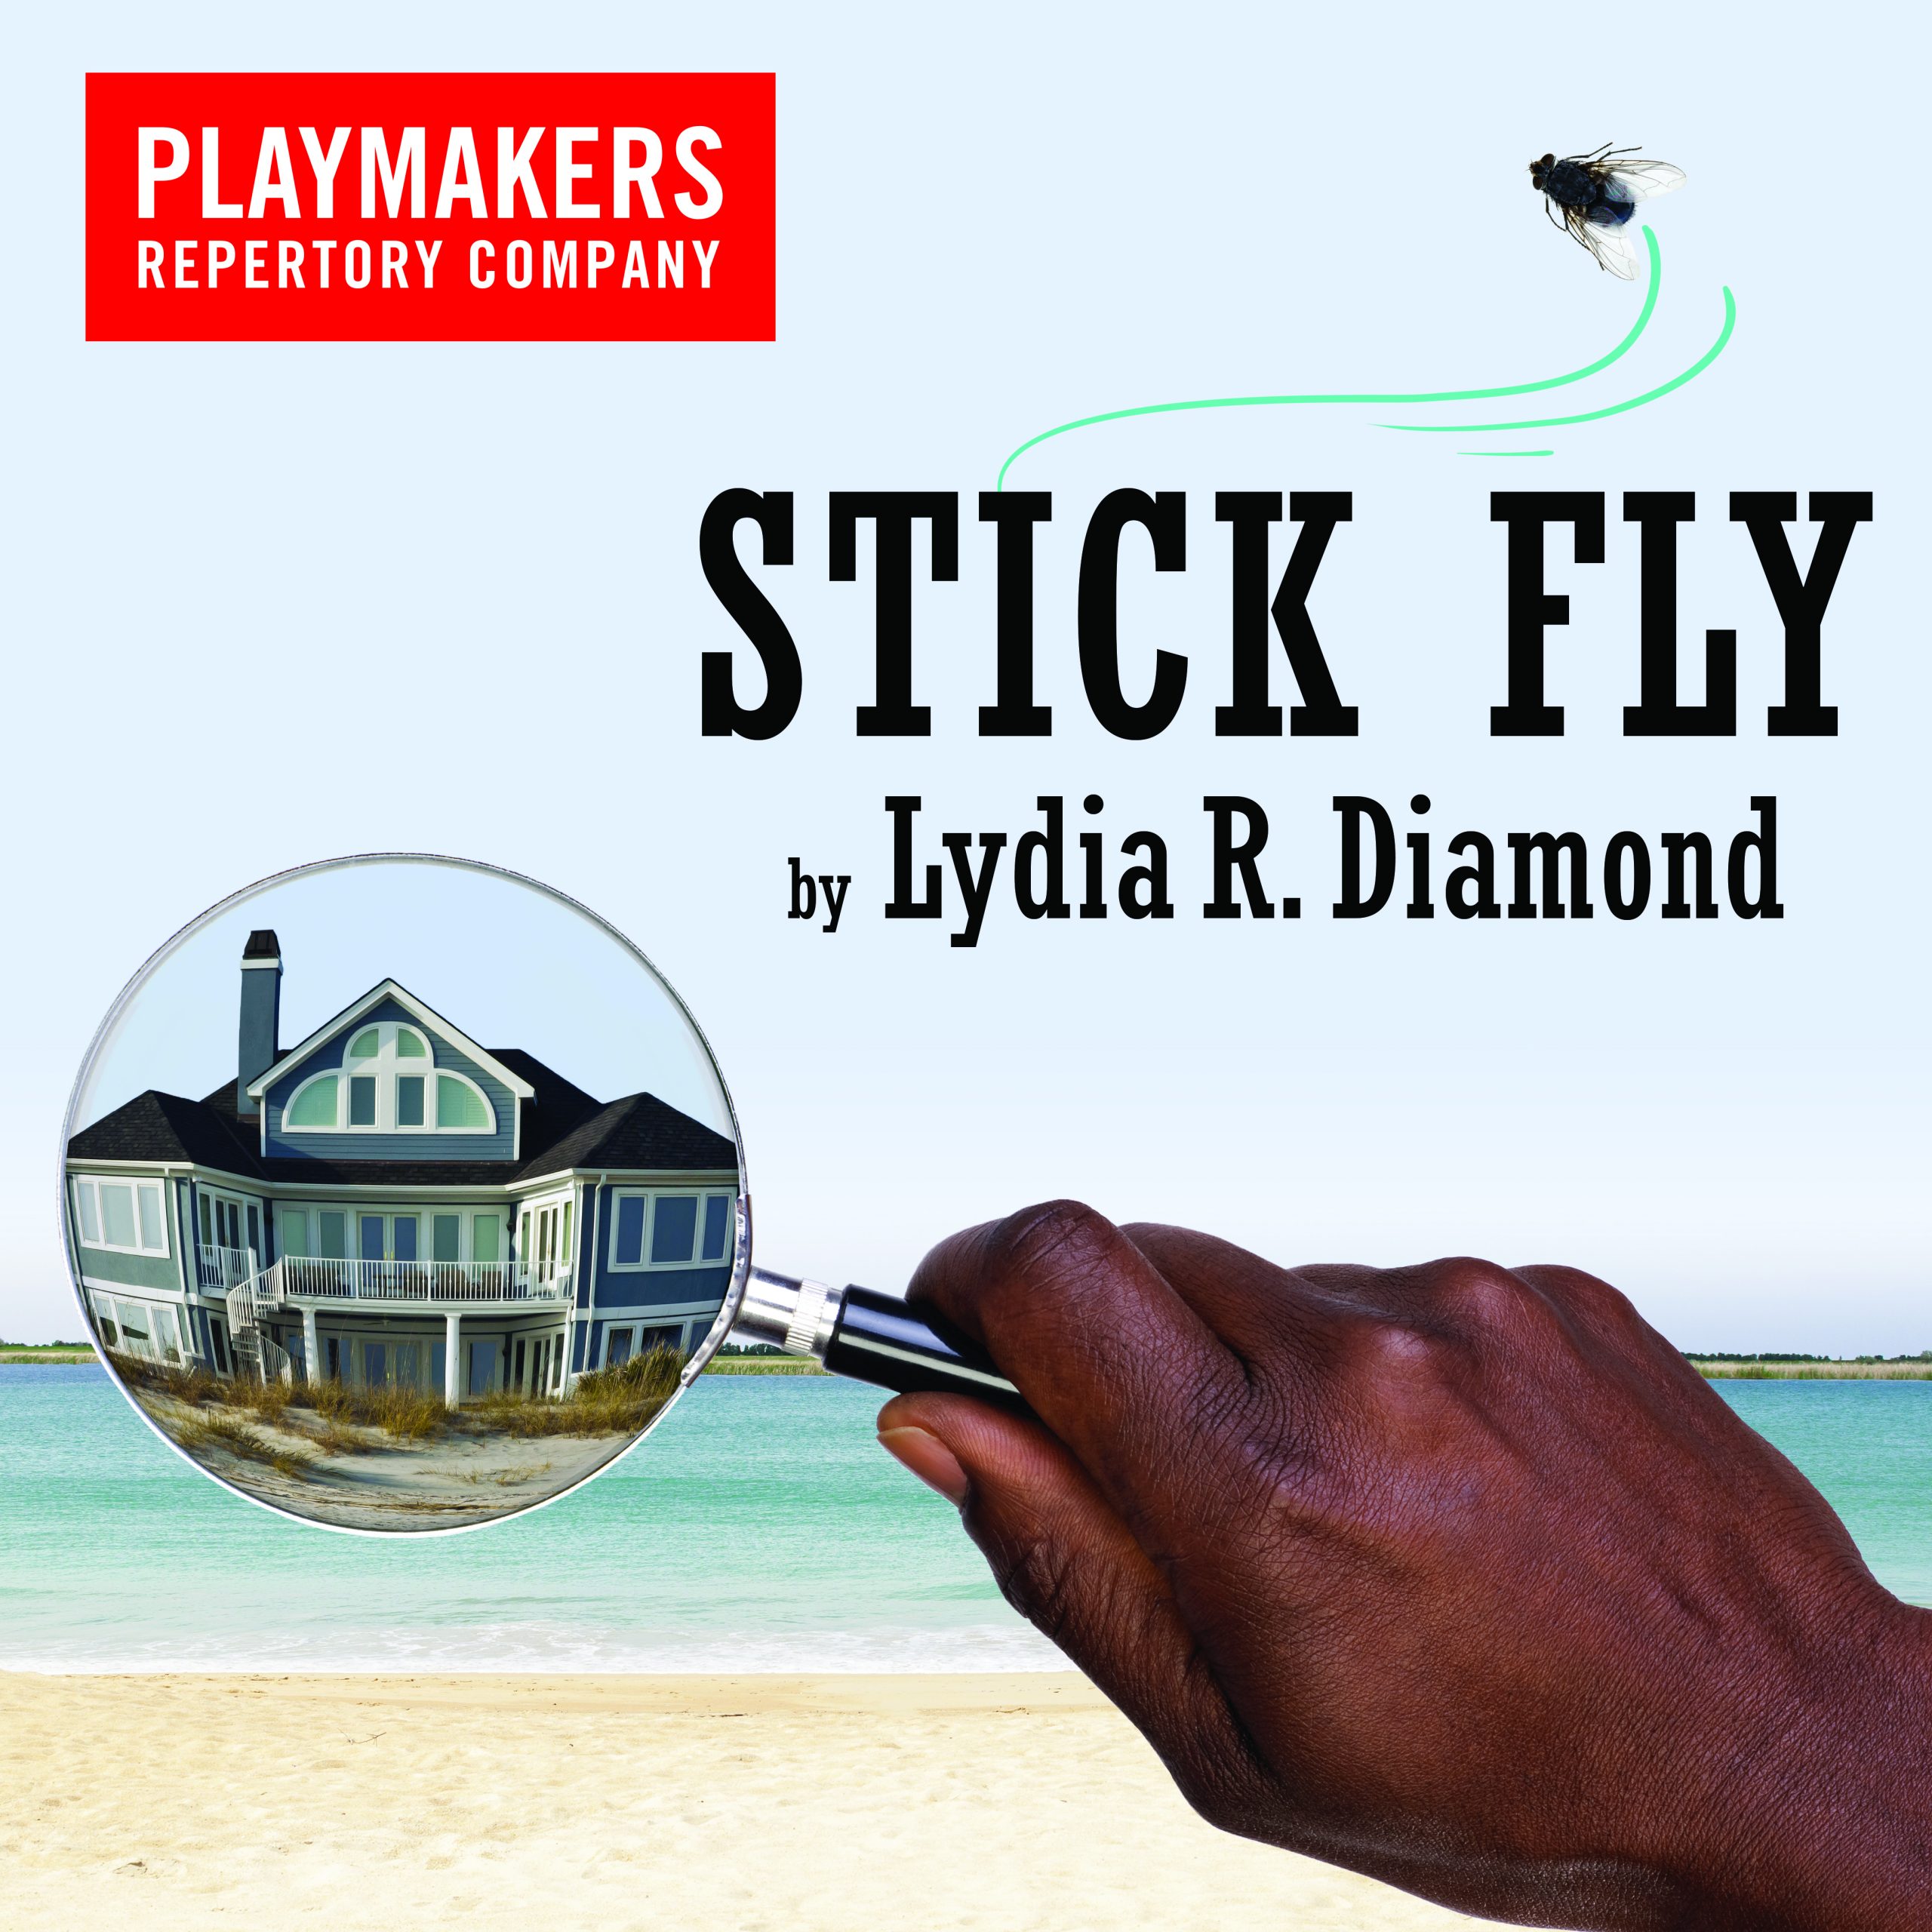 Graphic shows a hand holding a magnifying glass with the words "Stick Fly" on it and a beach in the background.